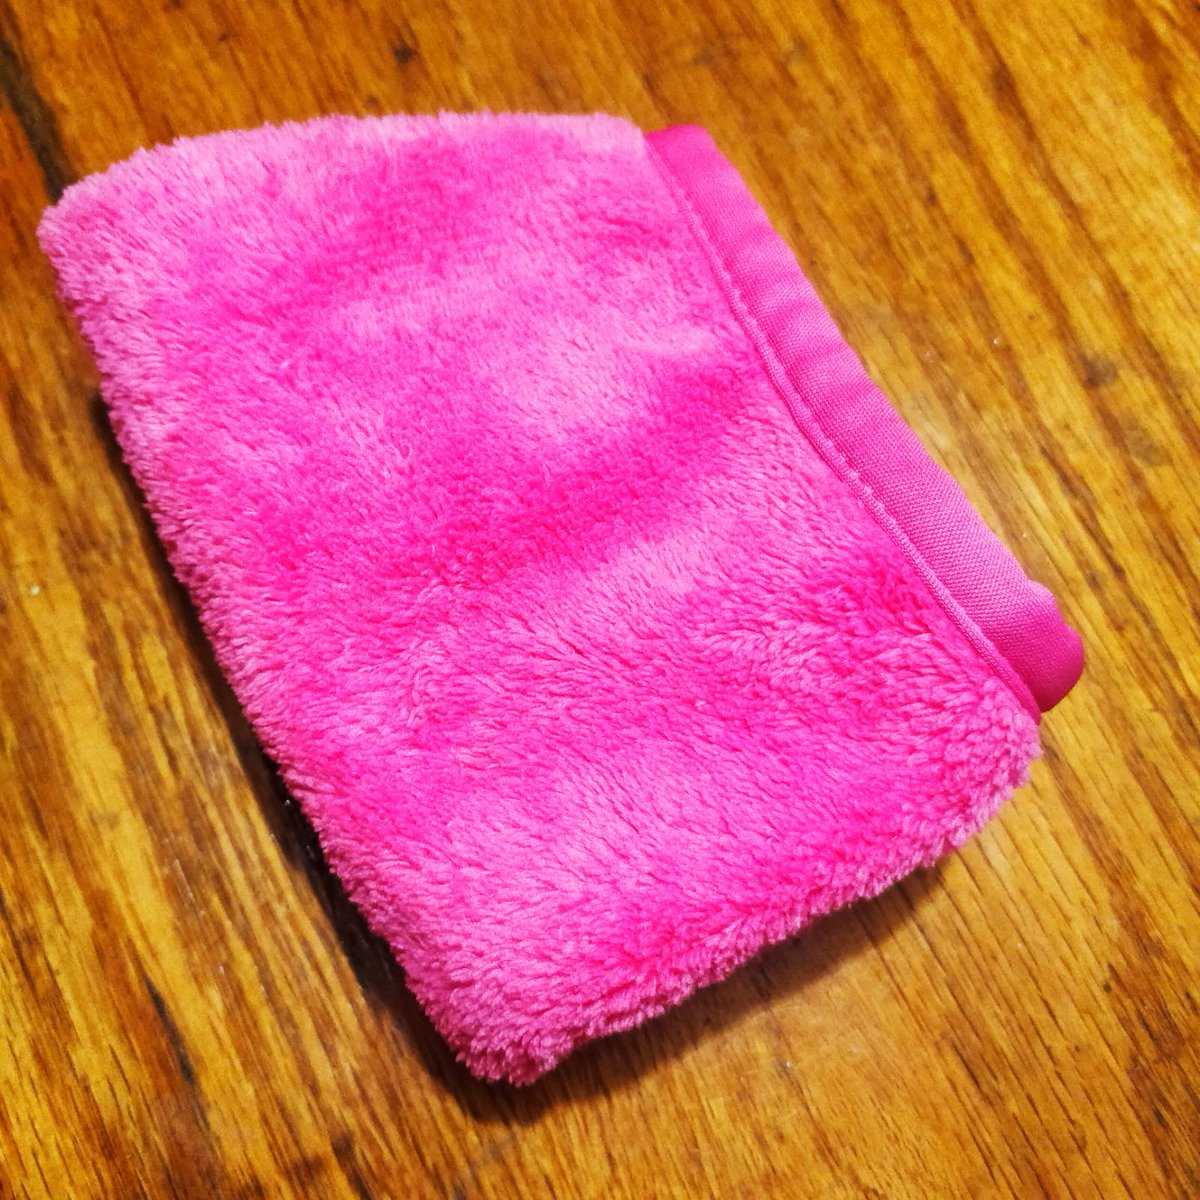 Makeup wipes are convenient-ish, but my skin doesn't like them. I ditched them for The Makeup Eraser. BEST DECISION EVER! I am still wondering how it removes waterproof mascara with just water.  https://amzn.to/3gKNQdB 